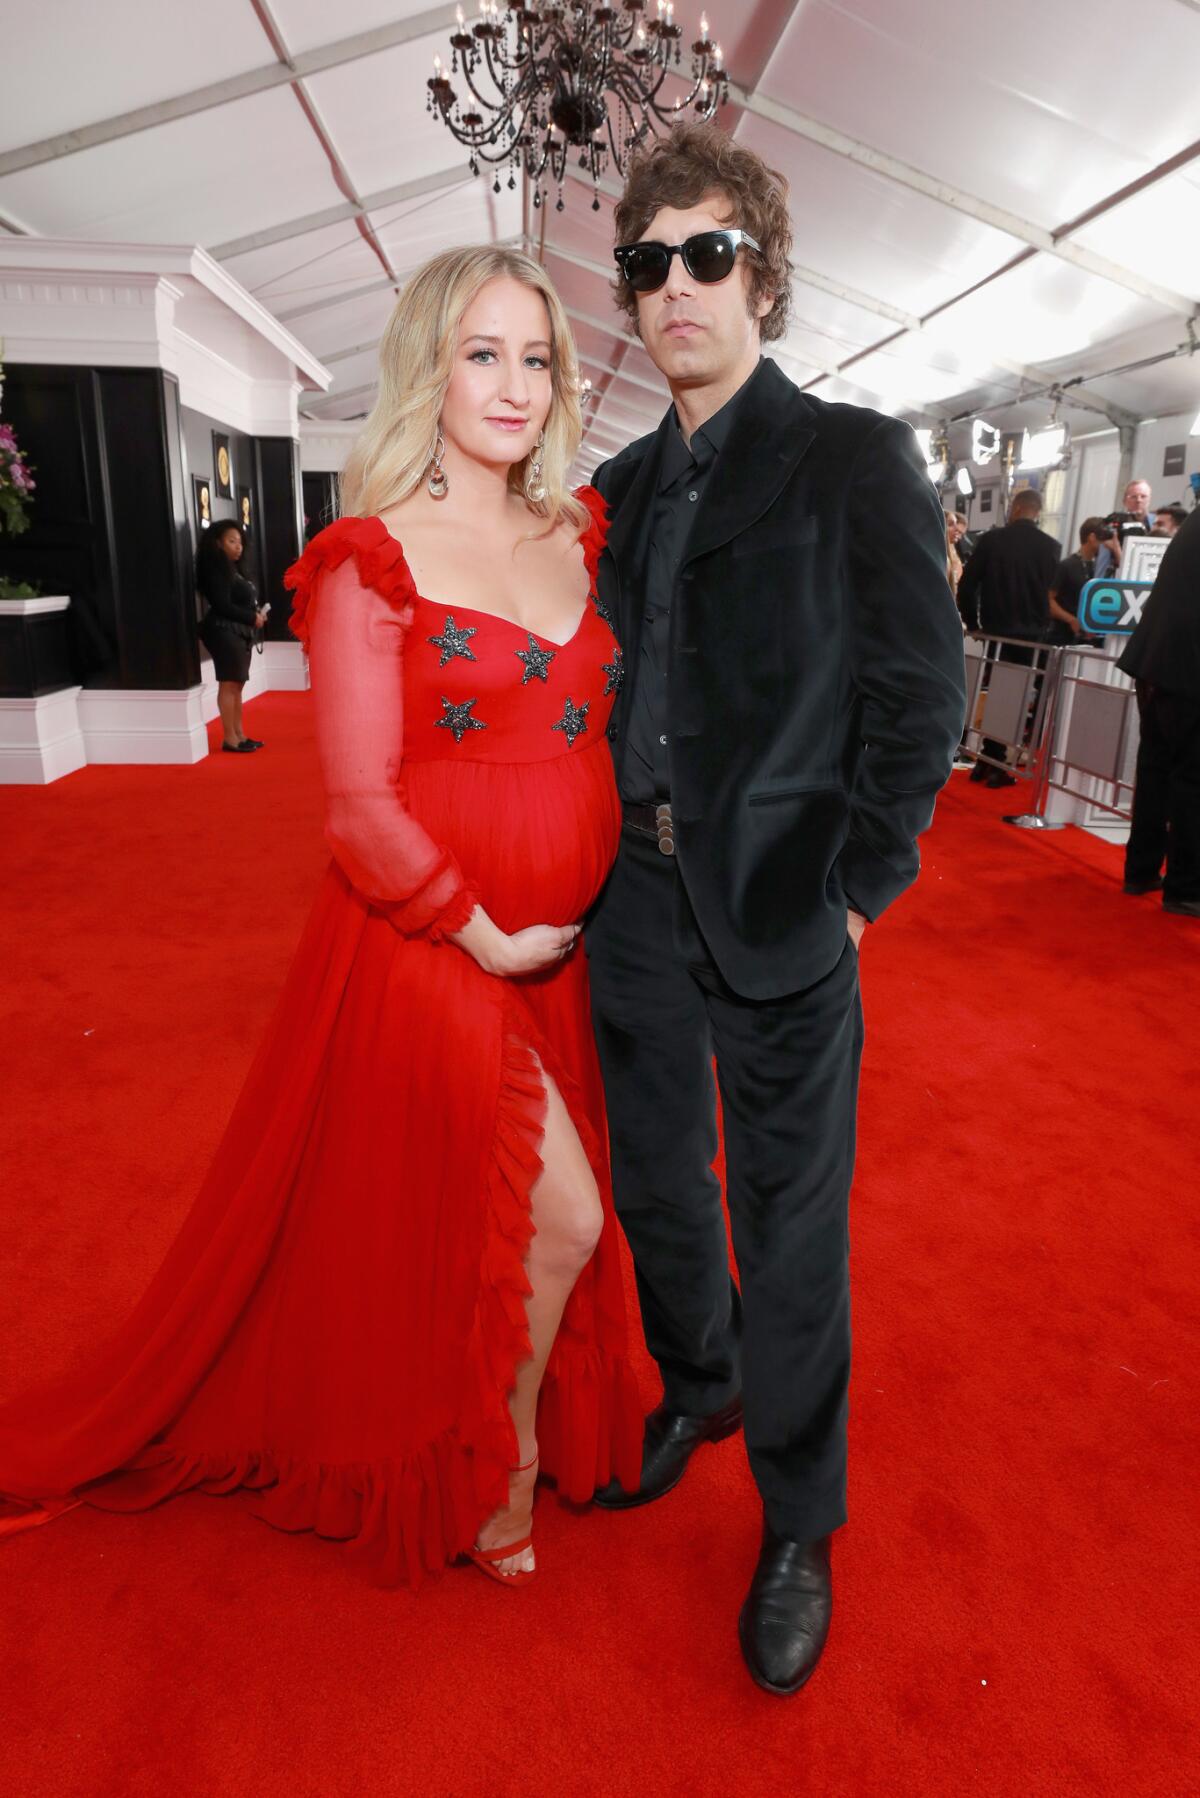 Margo Price, left, and husband Jeremy Ivey at the 61st Grammy Awards at Staples Center in Los Angeles on Sunday.